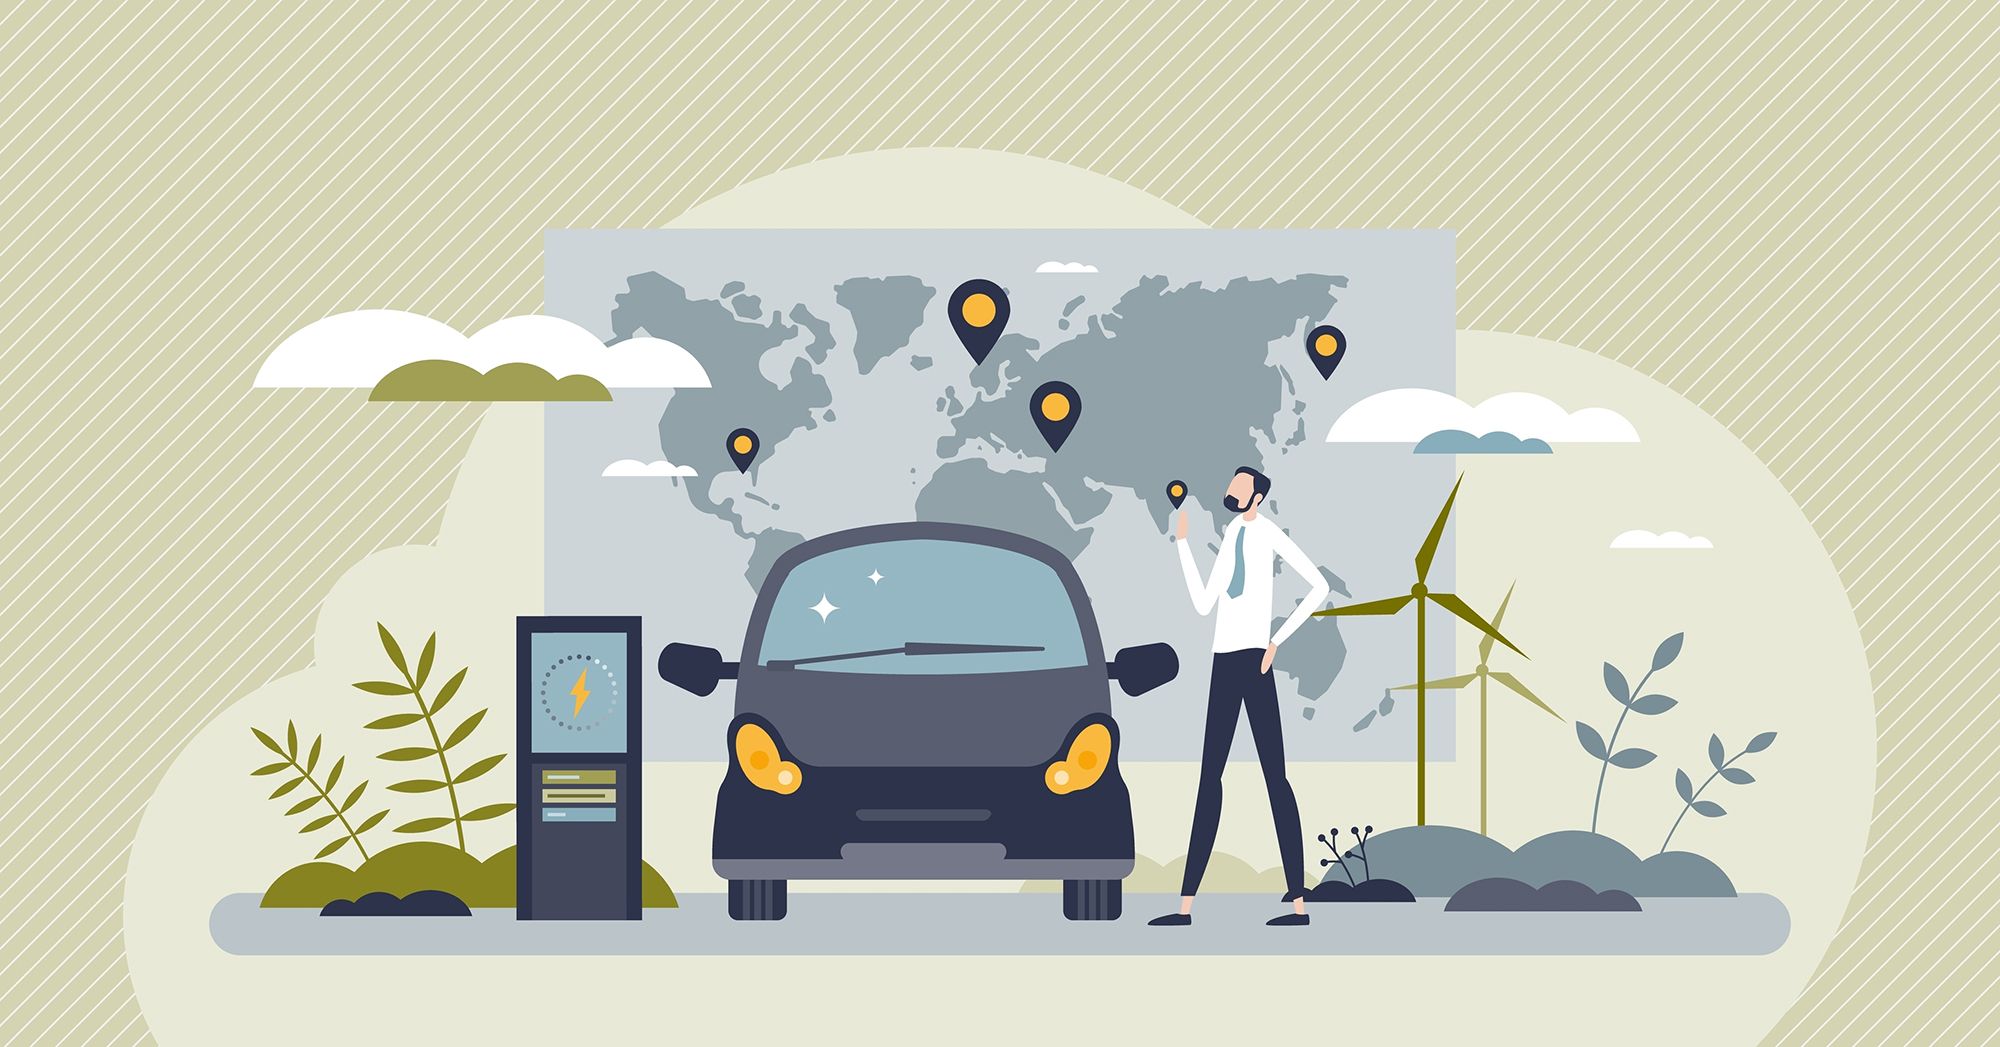 Accelerating green mobility infrastructure to meet growing B2C and B2B demand by industries